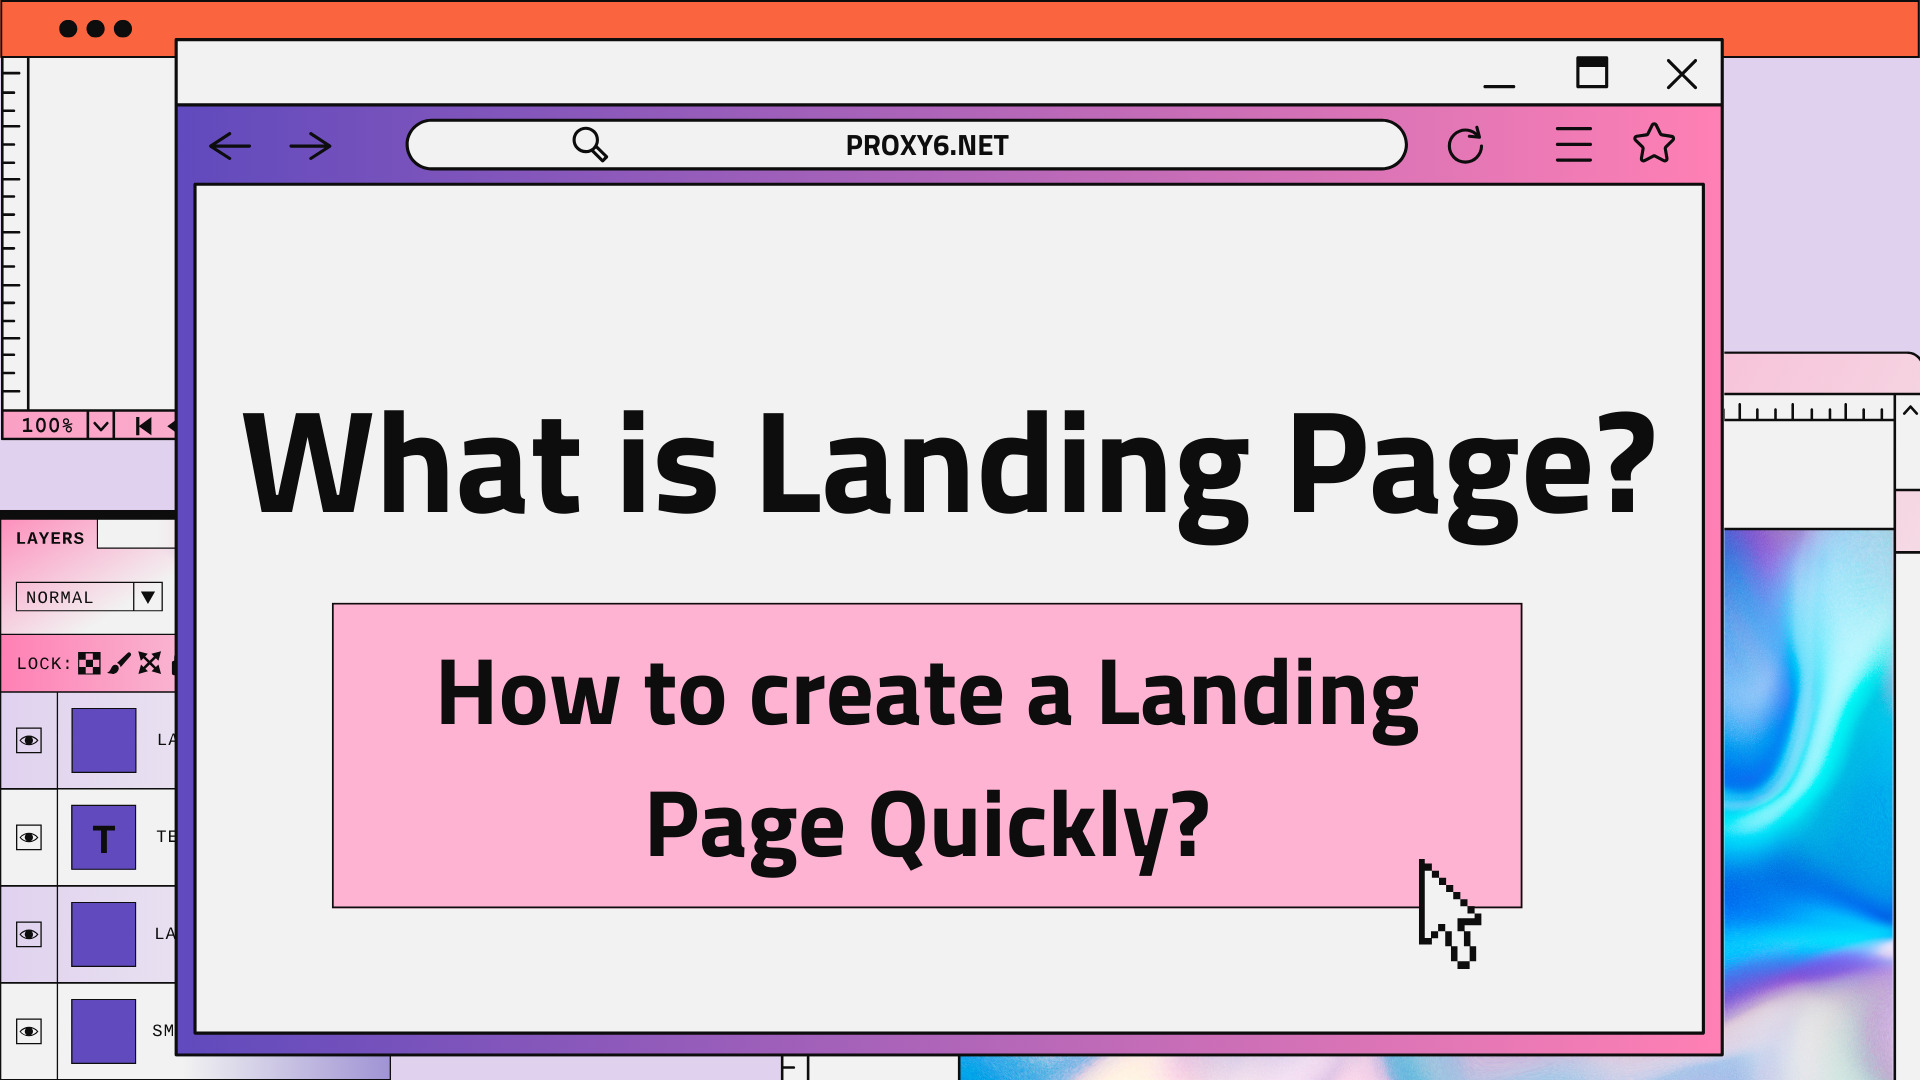 What is Landing Page? How to create a Landing Page Quickly?